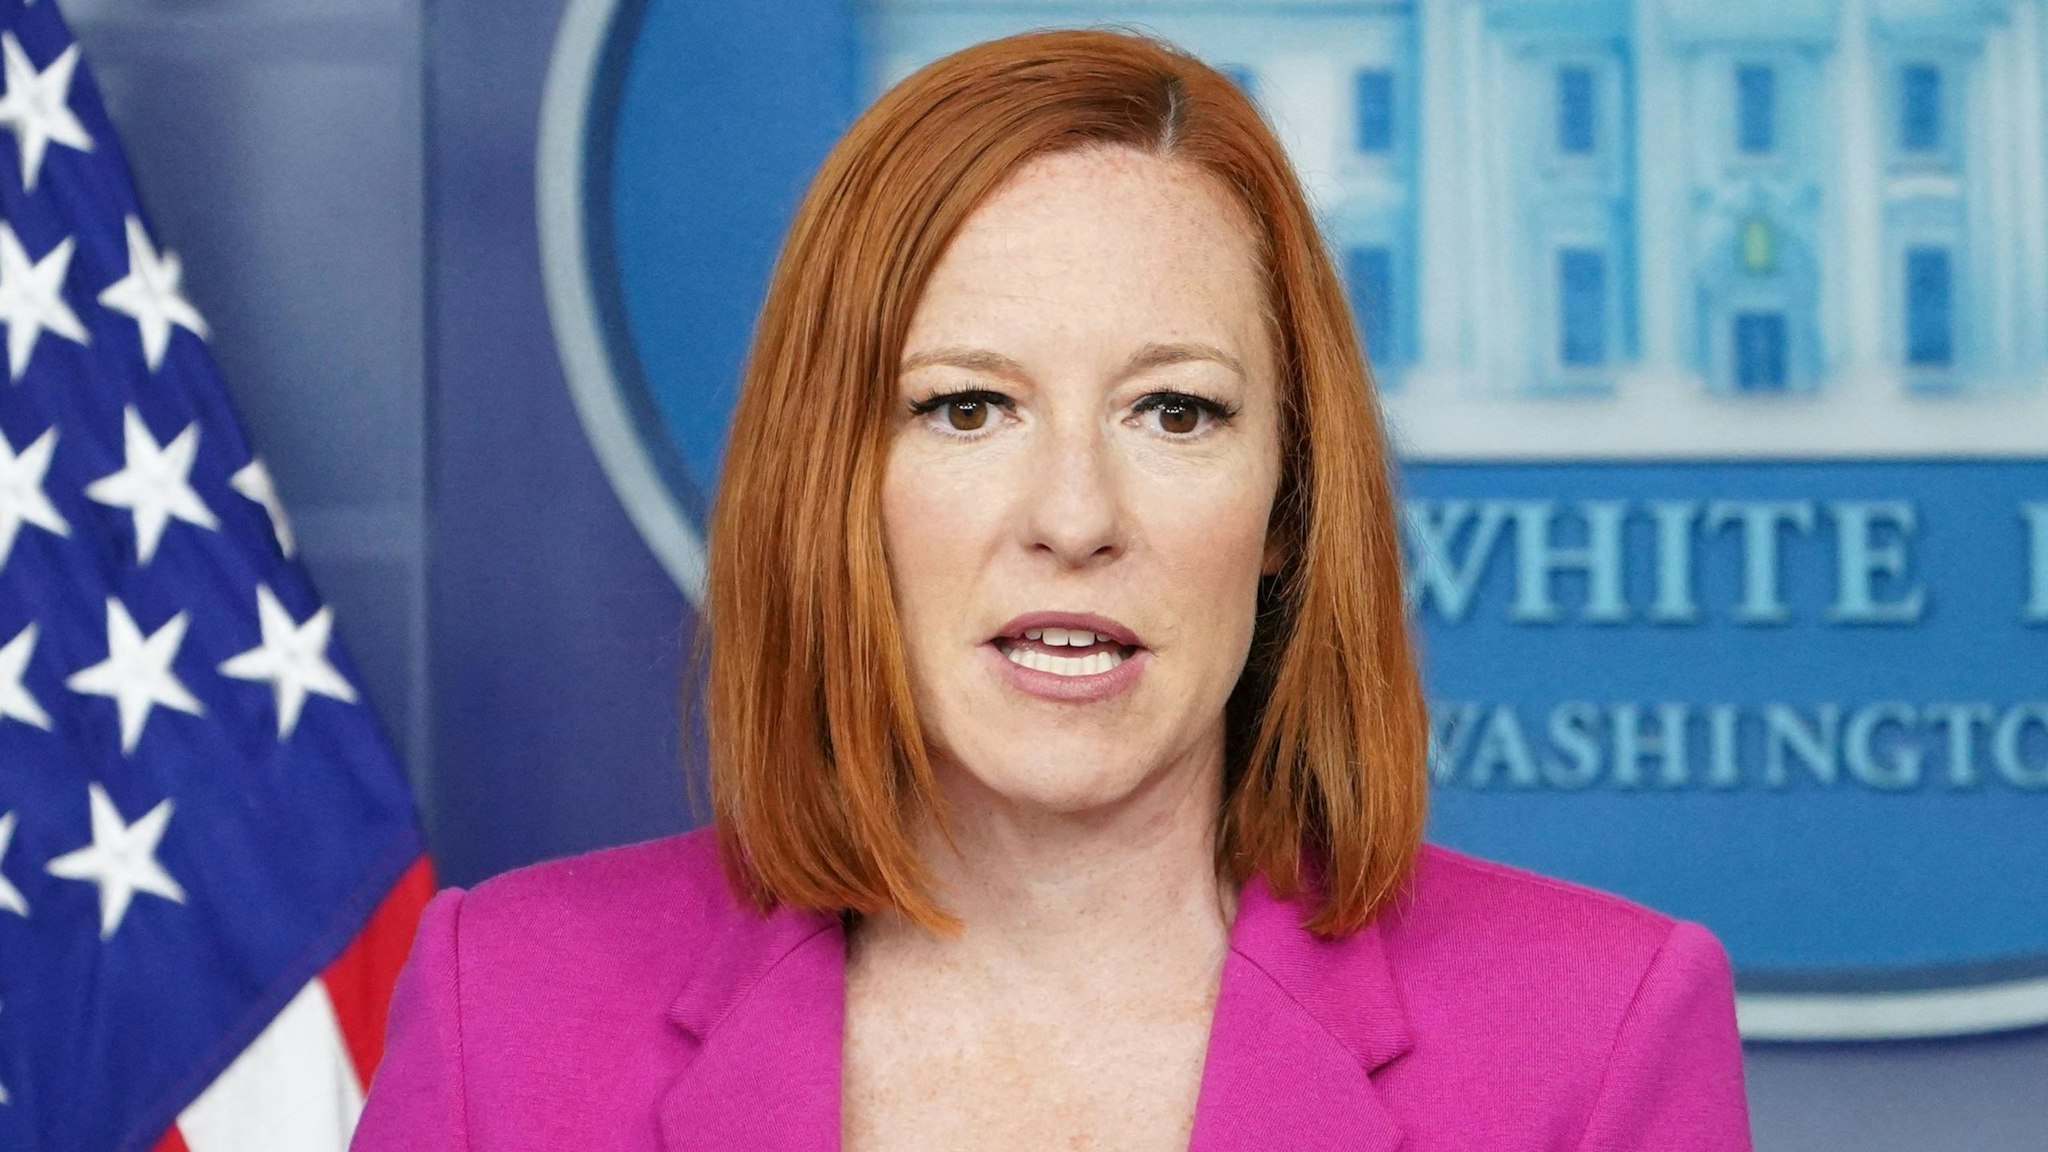 White House Press Secretary Jen Psaki speaks during the daily briefing in the Brady Briefing Room of the White House in Washington, DC on June 22, 2021.